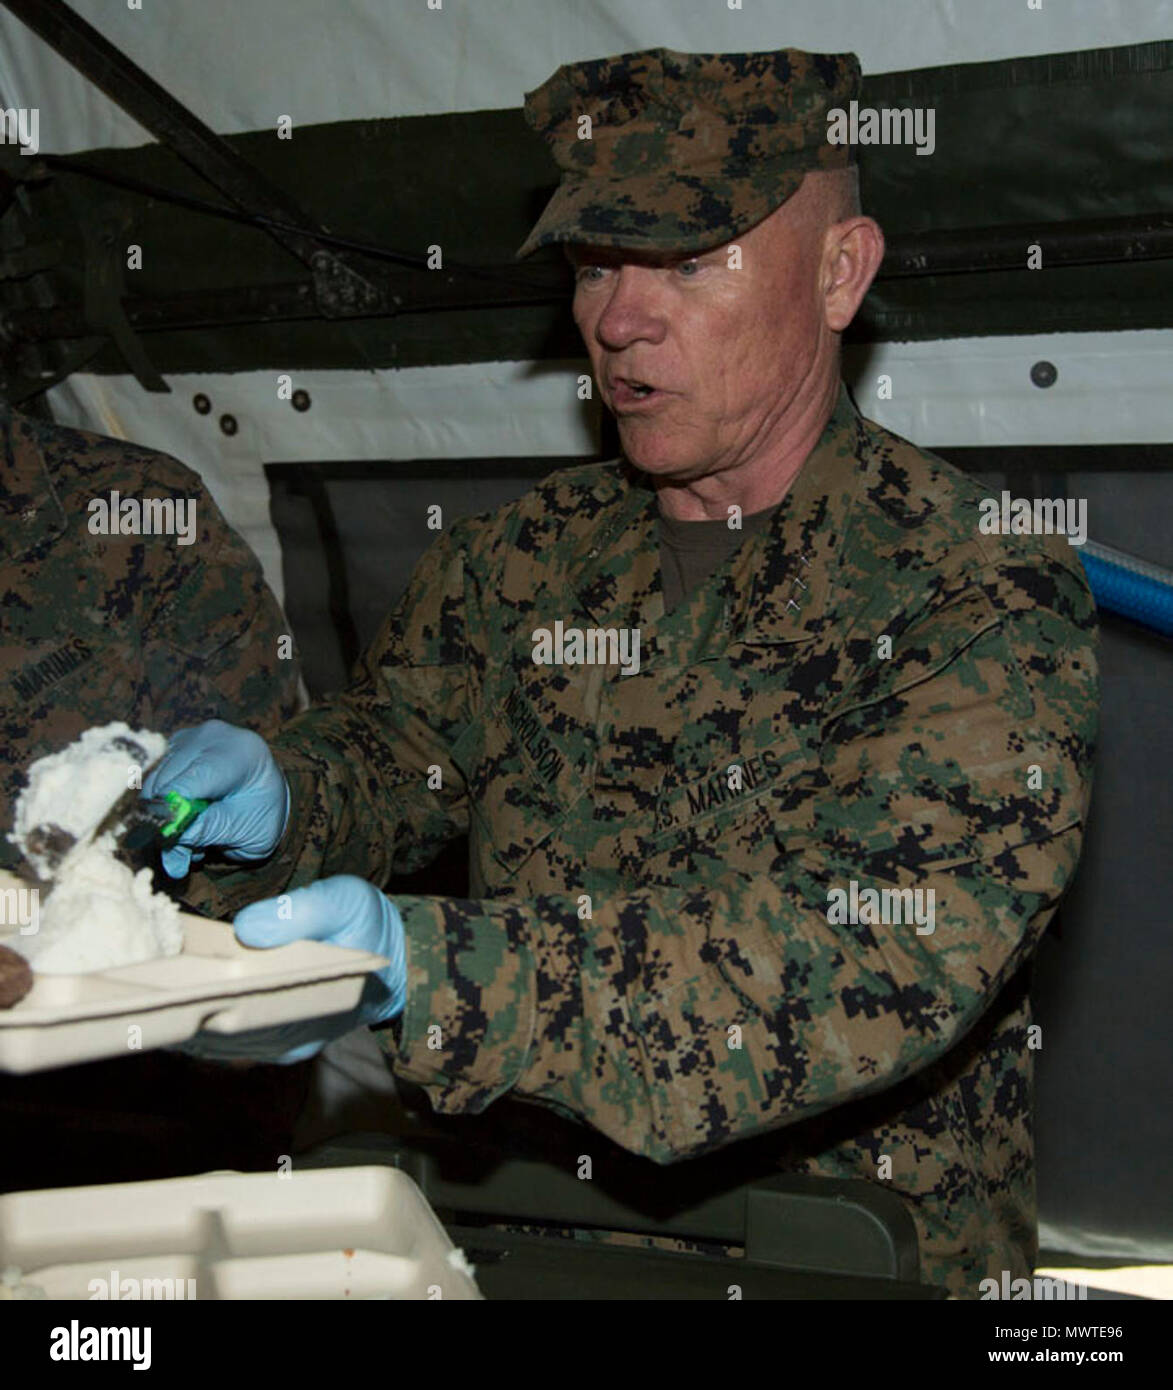 U.S. Marine Corps Lt. Gen. Lawrence Nicholson, the Okinawa Area and III Marine Expeditionary Force Commanding General  with III Marine Headquarters Group (III MHG), serves chow to service members during Marine Expeditionary Force Exercise 2017(MEFEX 17) at Range GP 304 on Marine Corps Base Camp Hansen, Okinawa, Japan, April 27, 2017. MEFEX 17, a command and control exercise conducted in a simulated deployed environment, is designed to synchronize and bring to bear the full spectrum of III MEF, while remaining ready to provide the Marine Corps with an experienced staff capable of integrating wi Stock Photo